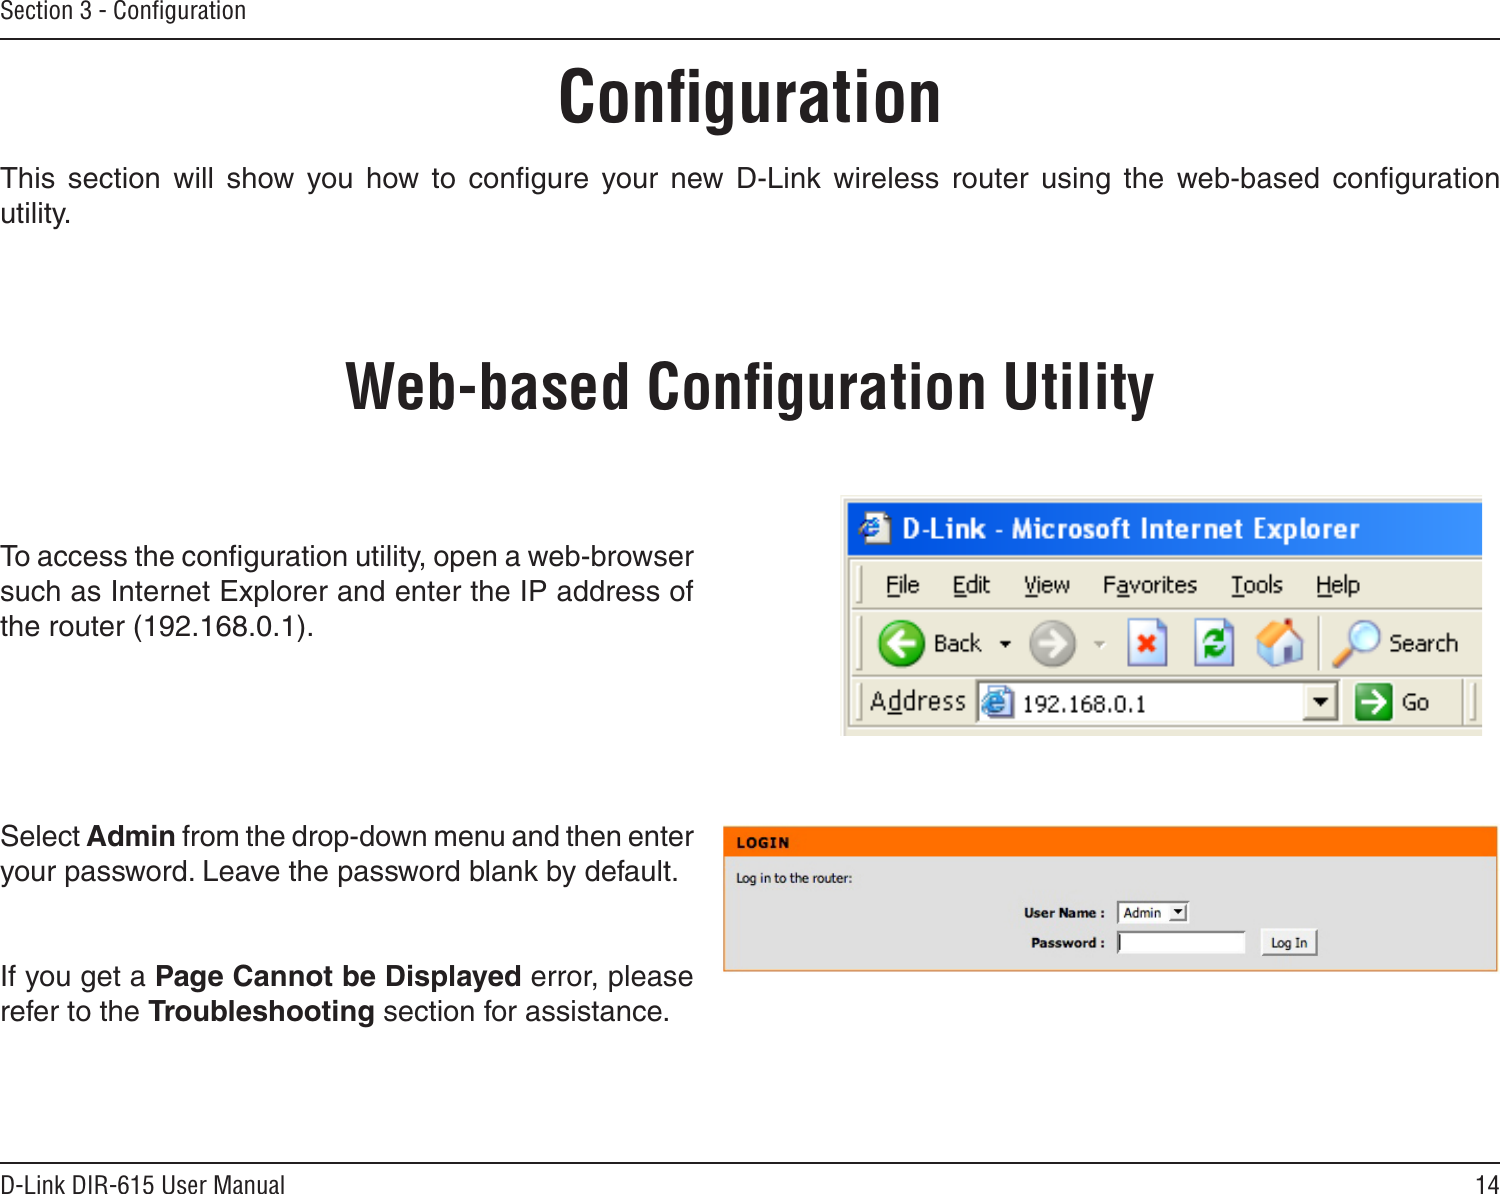 14D-Link DIR-615 User ManualSection 3 - ConﬁgurationConﬁgurationThis  section  will  show  you  how  to  conﬁgure  your  new  D-Link  wireless  router  using  the  web-based  conﬁguration utility.Web-based Conﬁguration UtilityTo access the conﬁguration utility, open a web-browser such as Internet Explorer and enter the IP address of the router (192.168.0.1).Select Admin from the drop-down menu and then enter your password. Leave the password blank by default.If you get a Page Cannot be Displayed error, please refer to the Troubleshooting section for assistance.